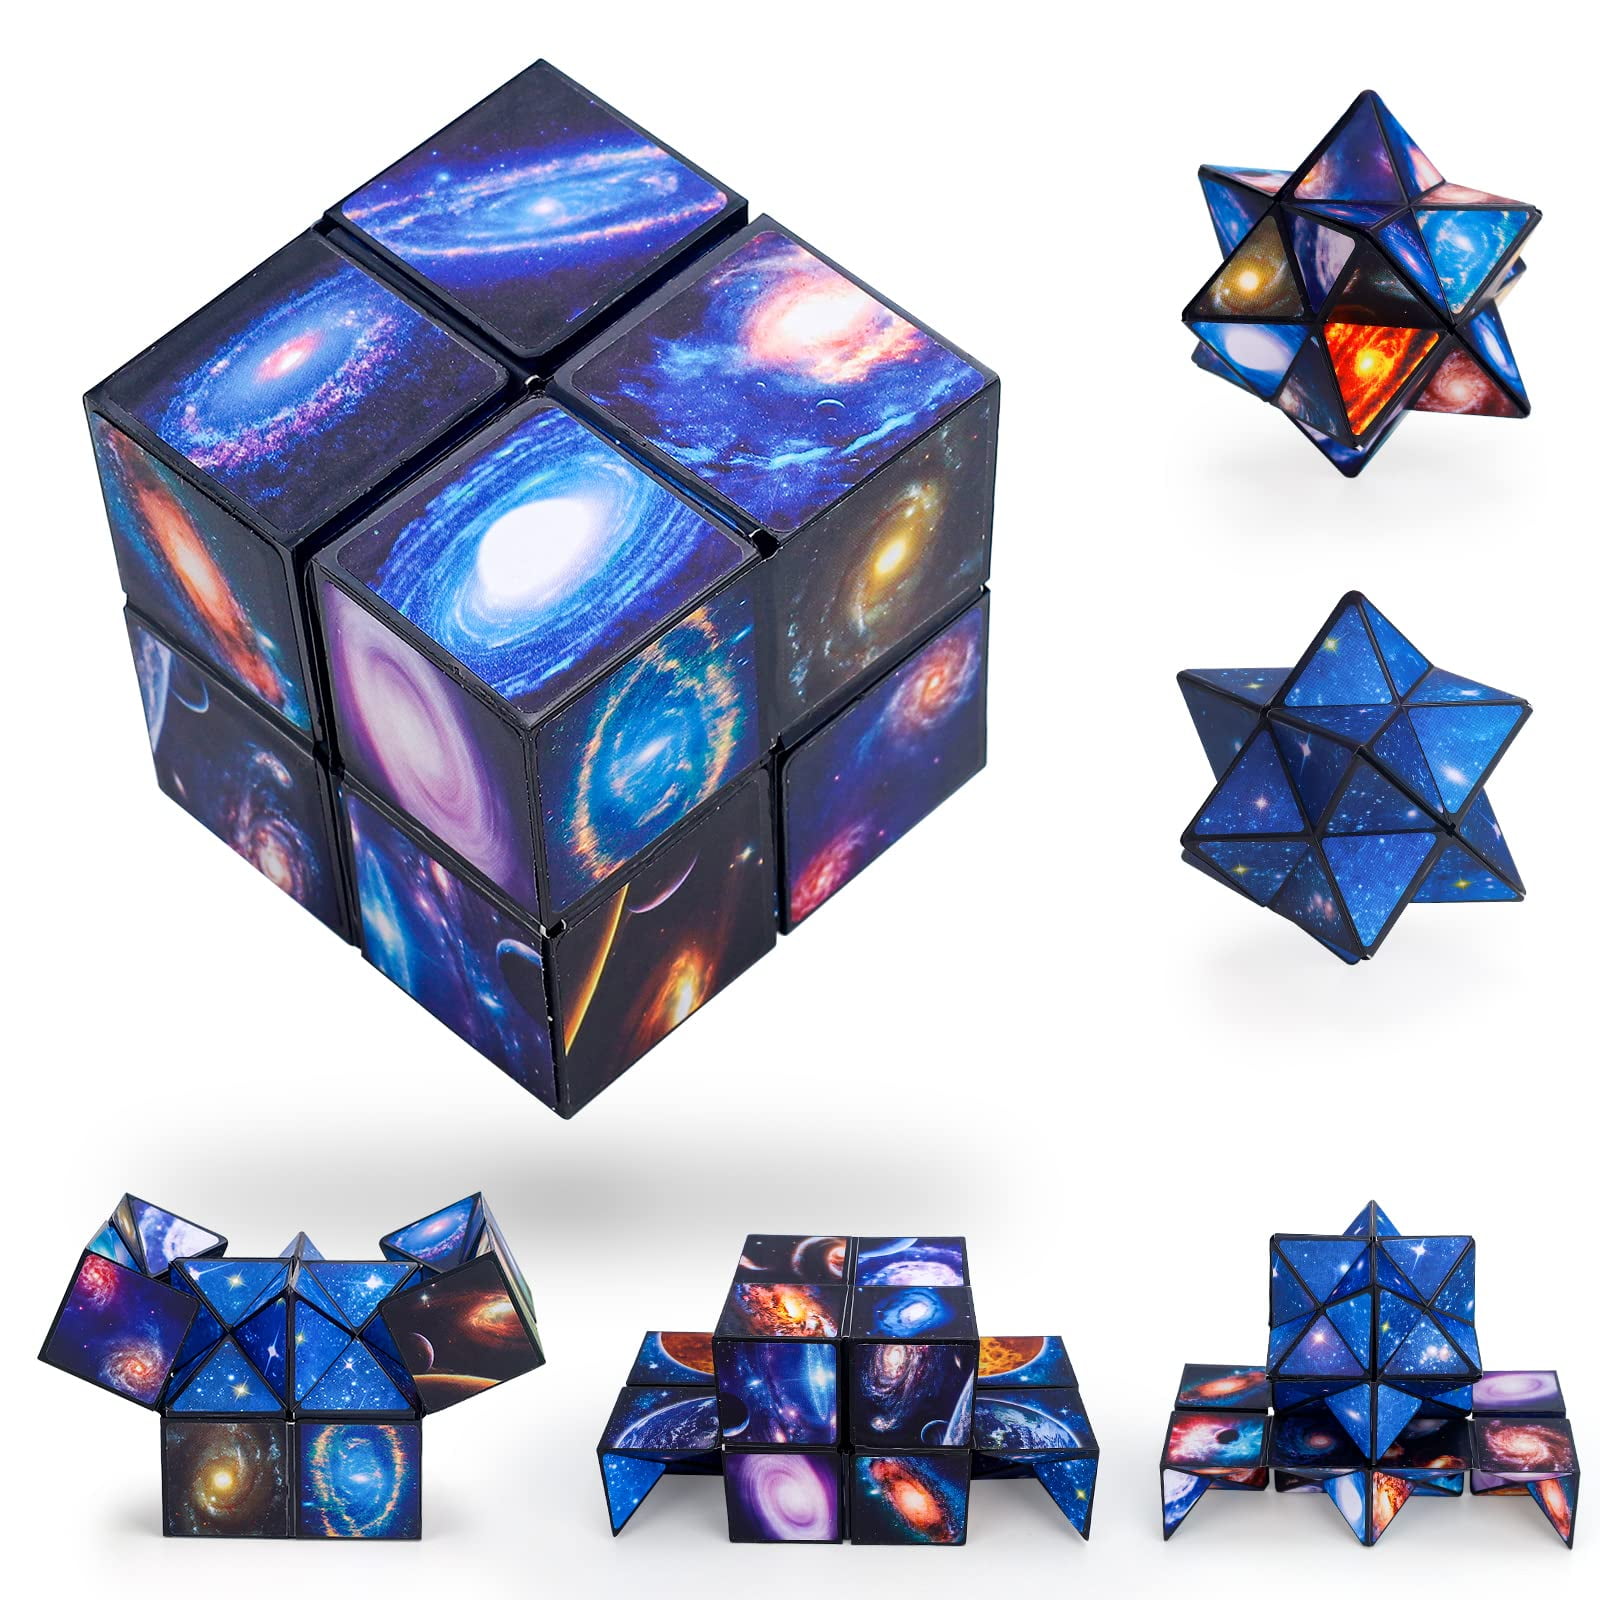  Fidget Toys Kids Puzzles Box: Infinity Cubes 3D Puzzles Boxes  Building Blocks STEM Magic Cubes Cool Stuff Gadgets Birthday Gifts for Ages  8 9 10 11 12 13+ Year Old Boys